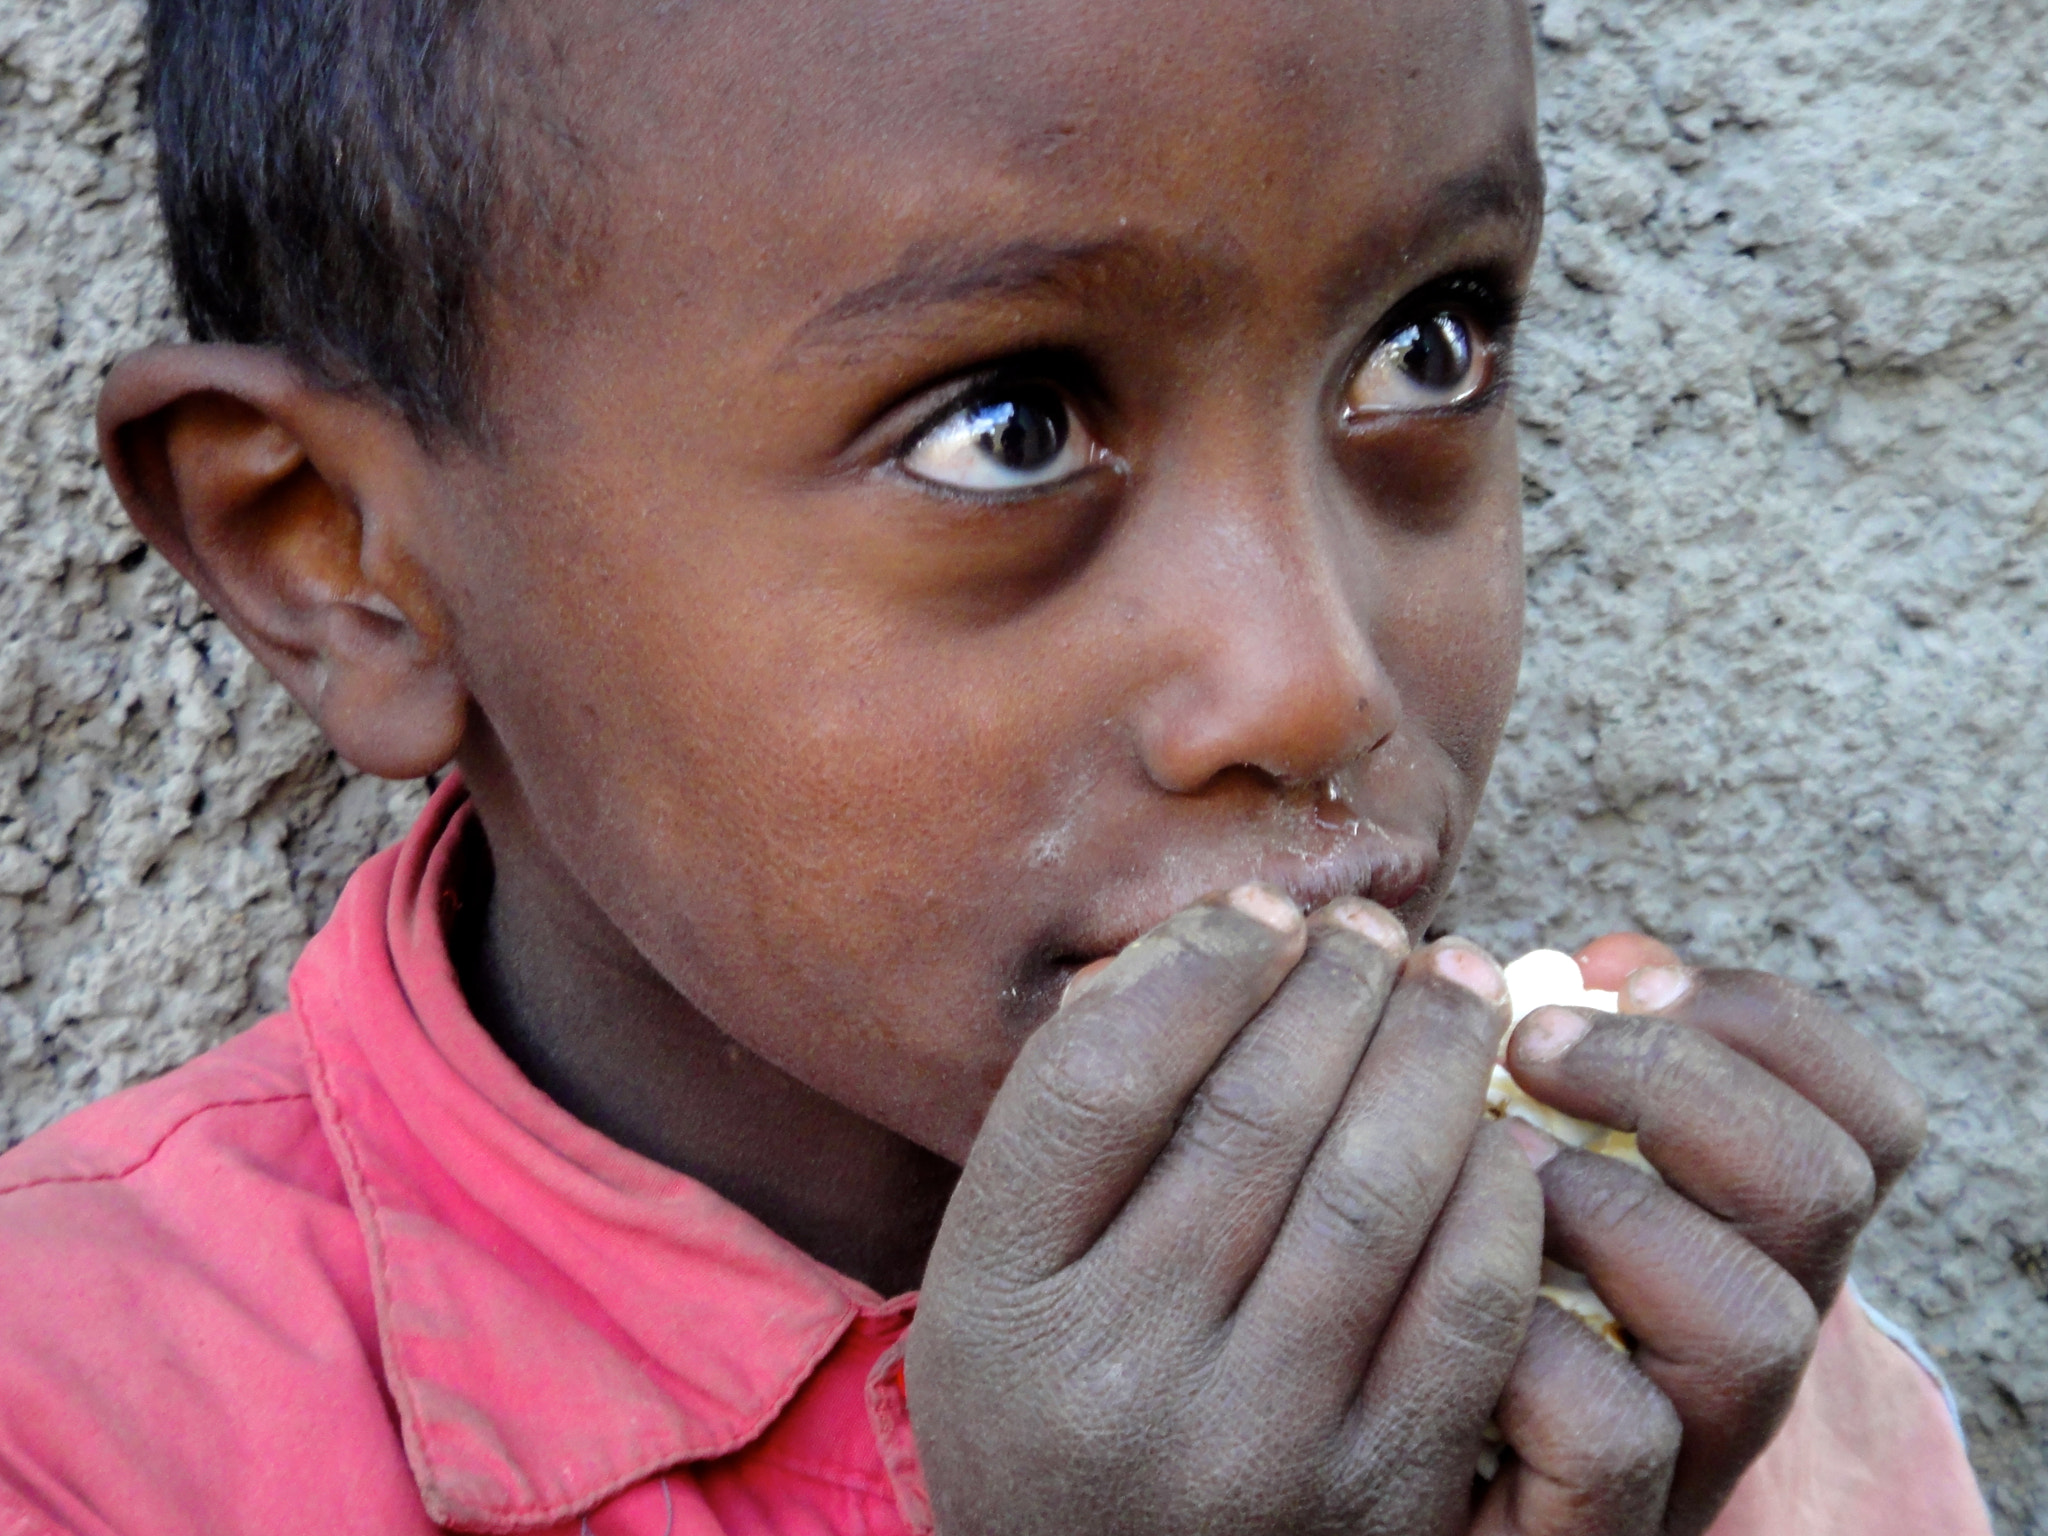 Sony DSC-TX7 sample photo. Ethiopia, dessie, sweet face, little boy, eating, hungry, happy, red shirt, big eyes, village... photography